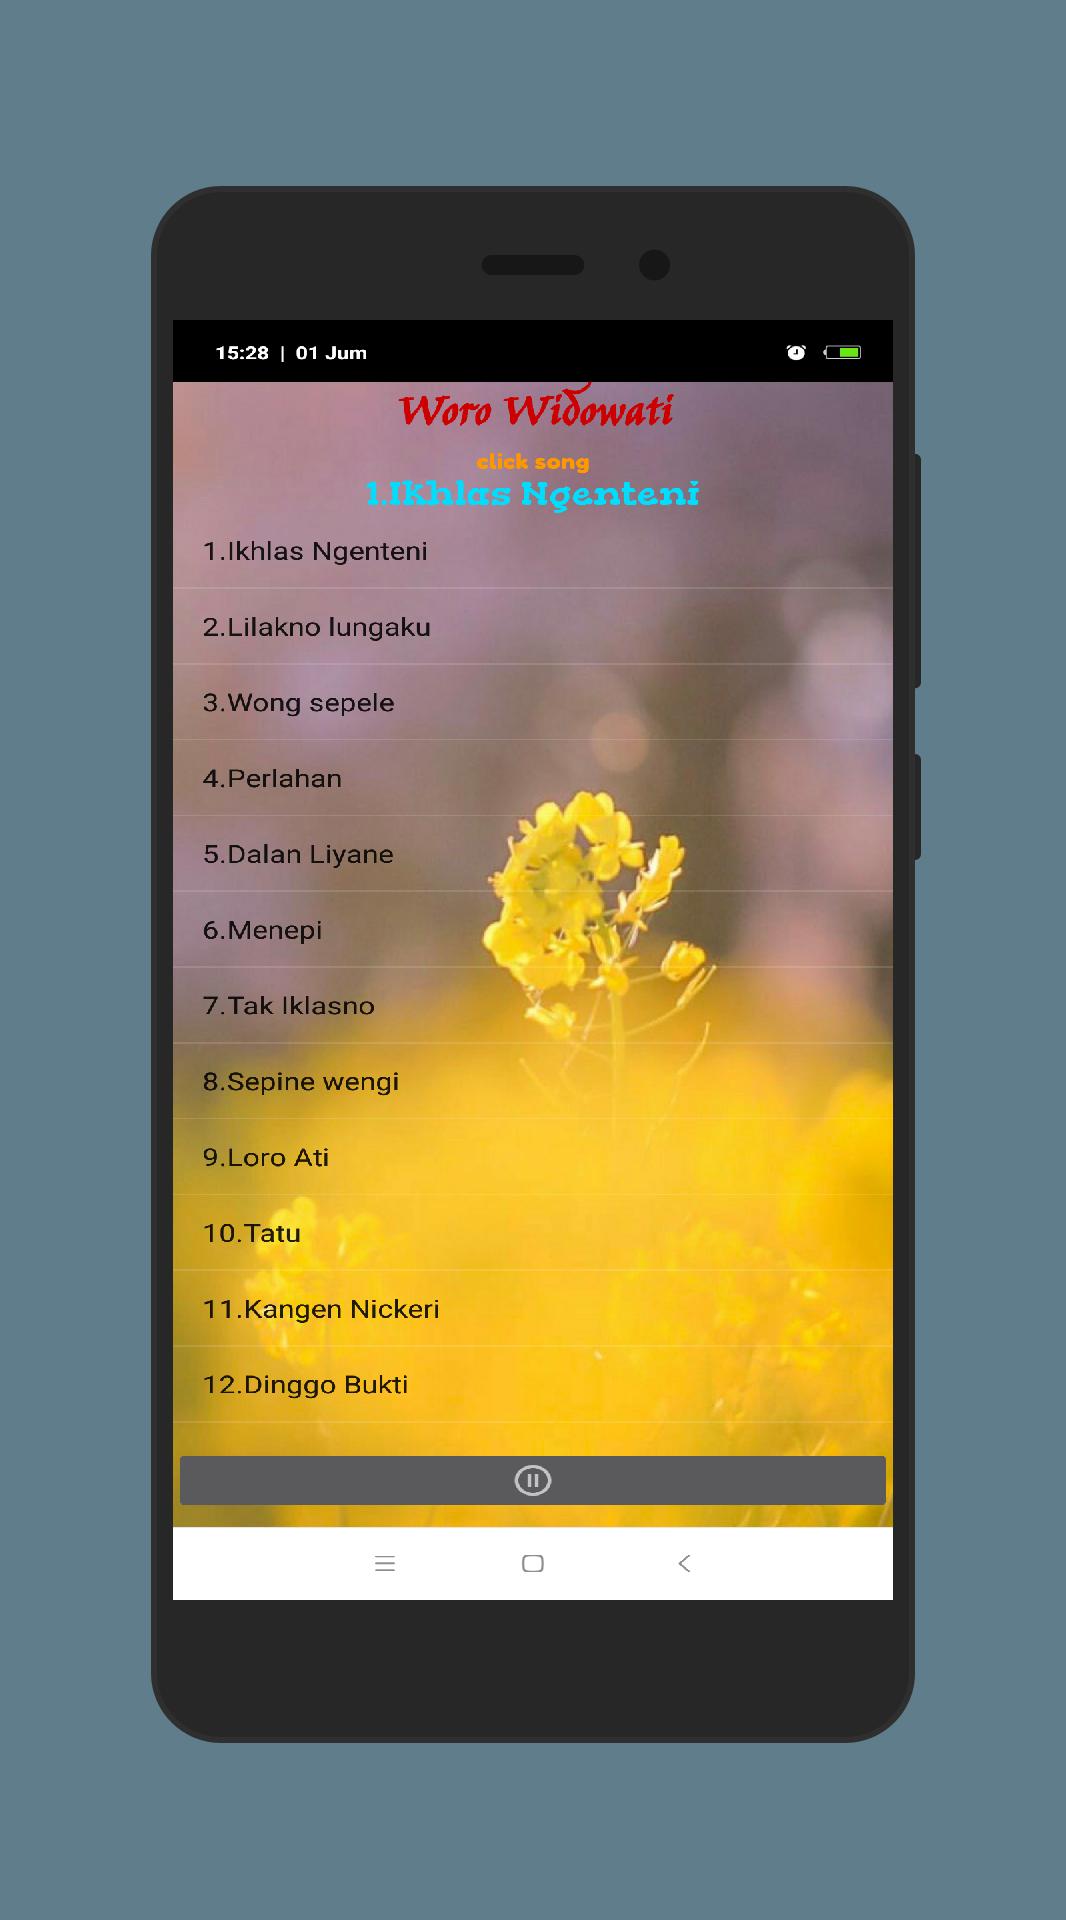 Woro Widowati Lilakno Lungaku Mp3 Offline For Android Apk Download